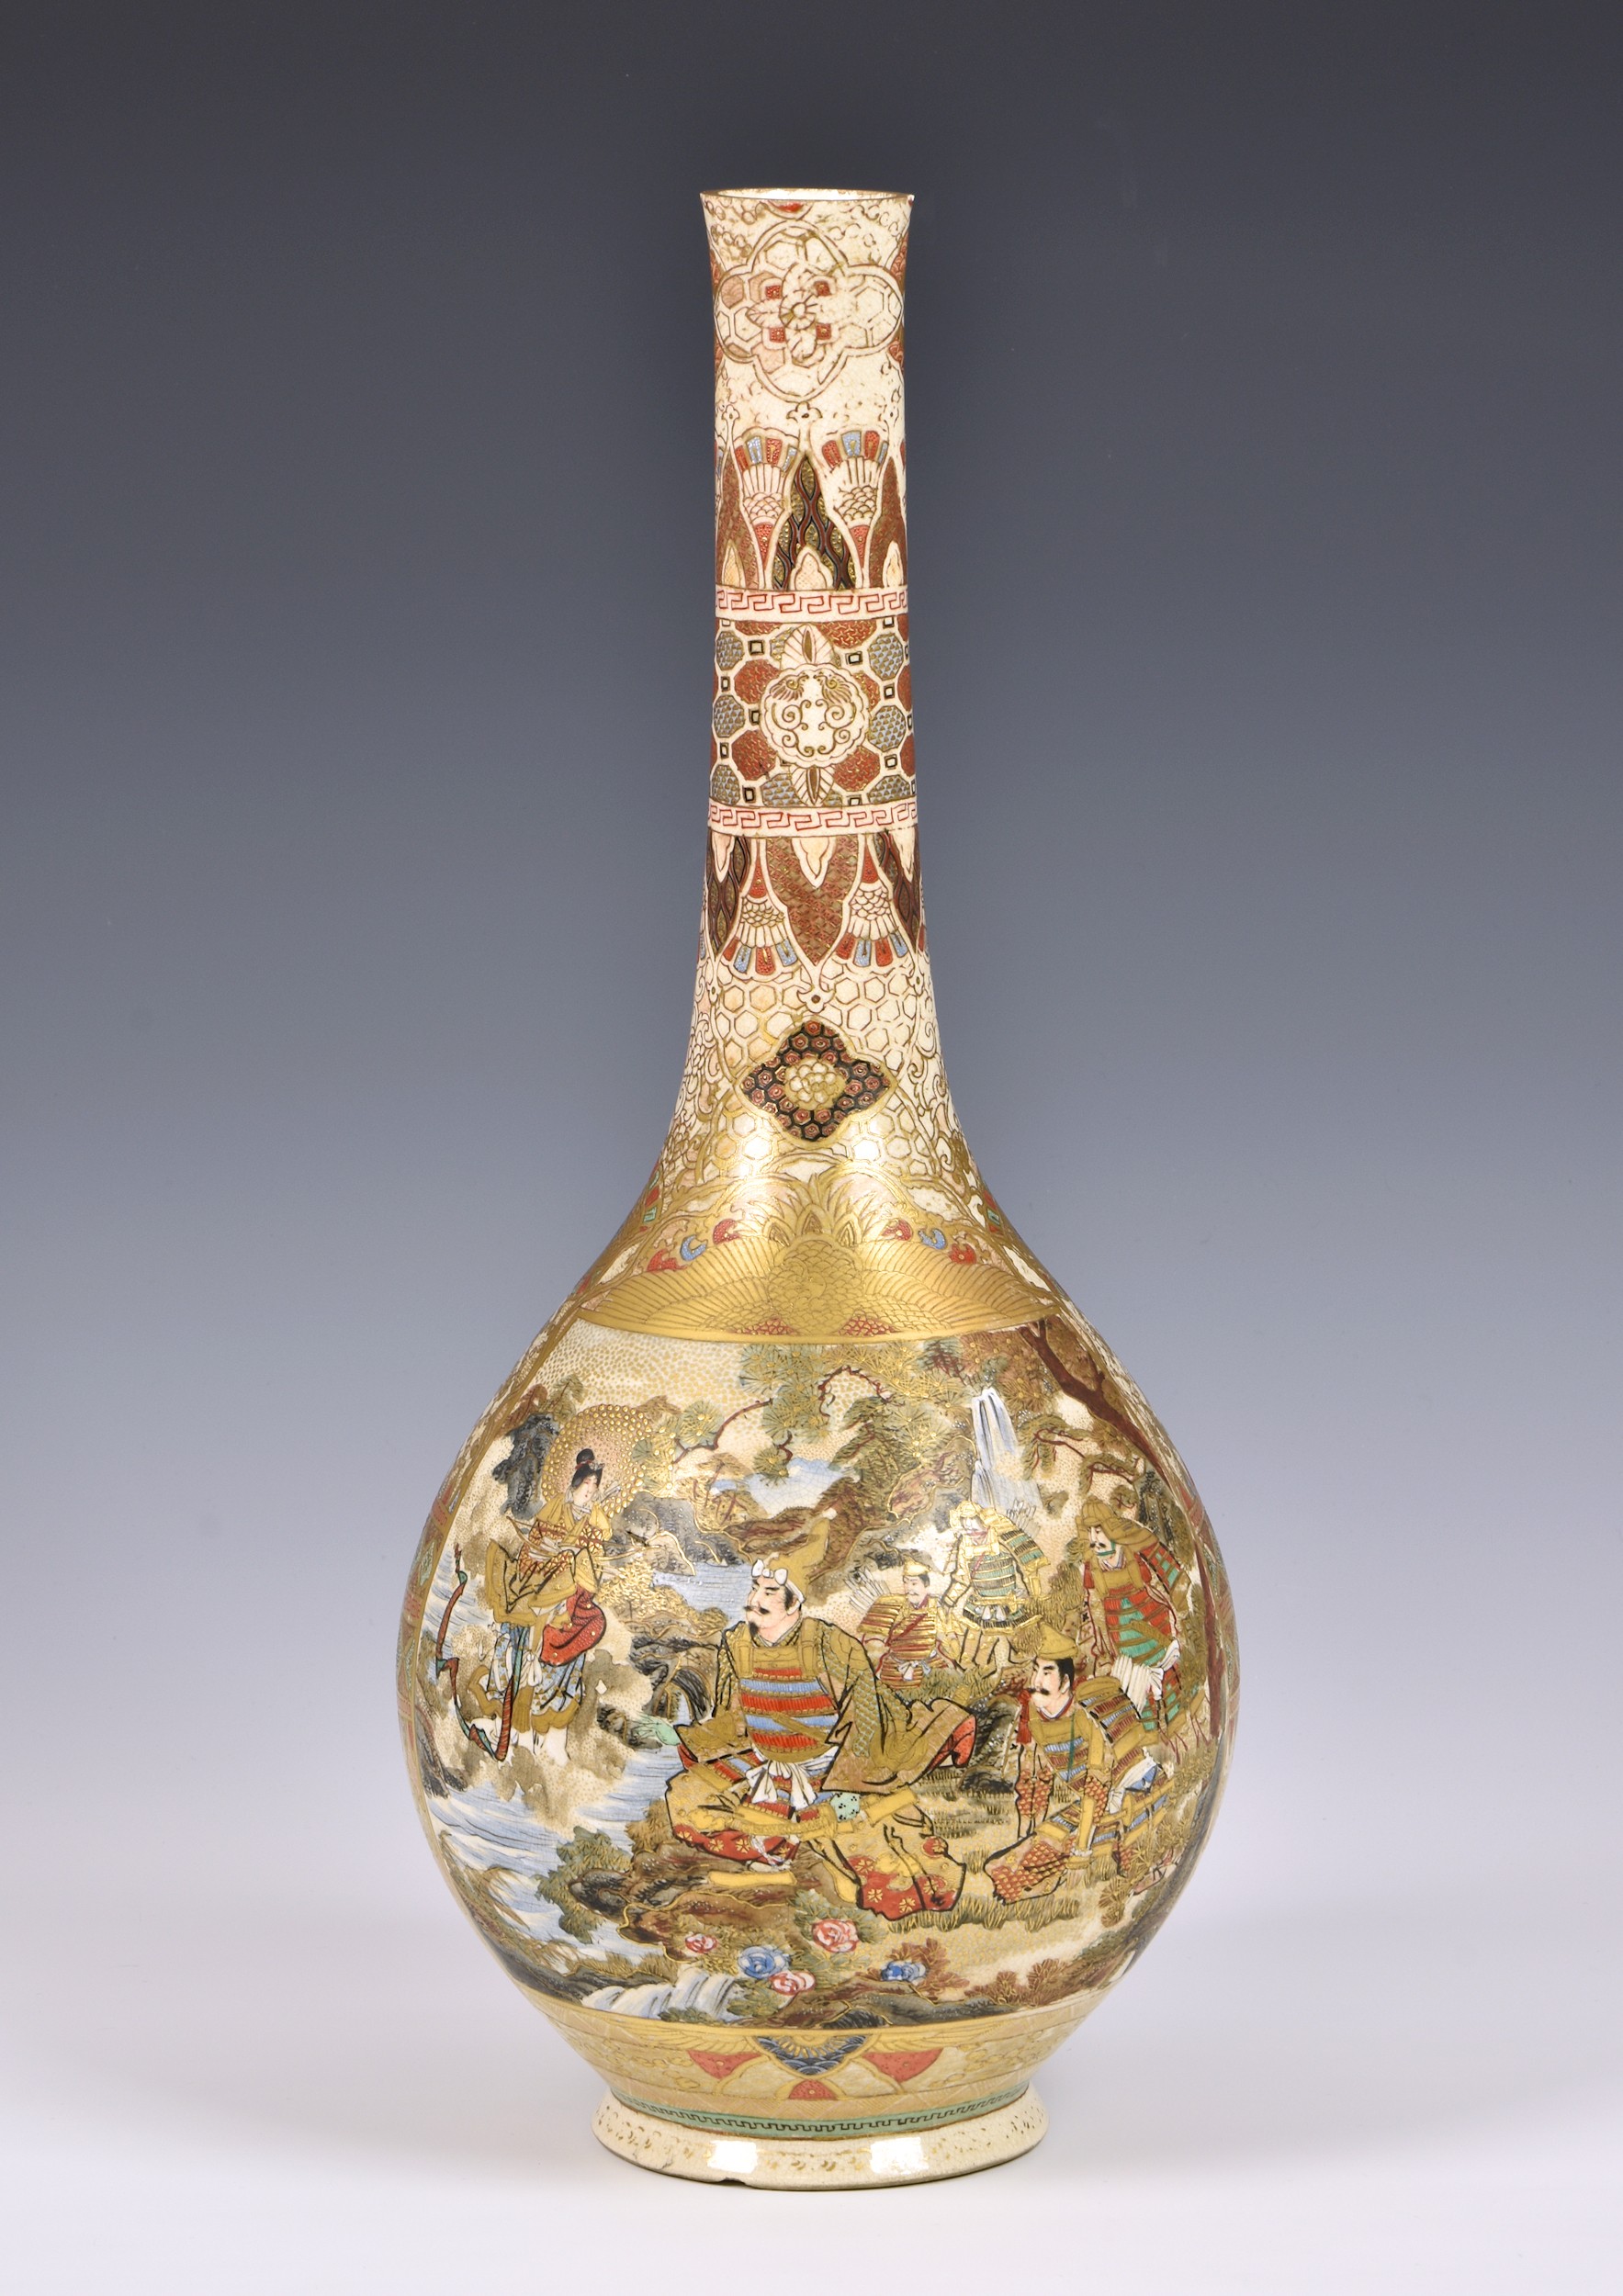 A large Japanese Satsuma bottle vase, Meiji period (1868-1912), signed in iron red with three